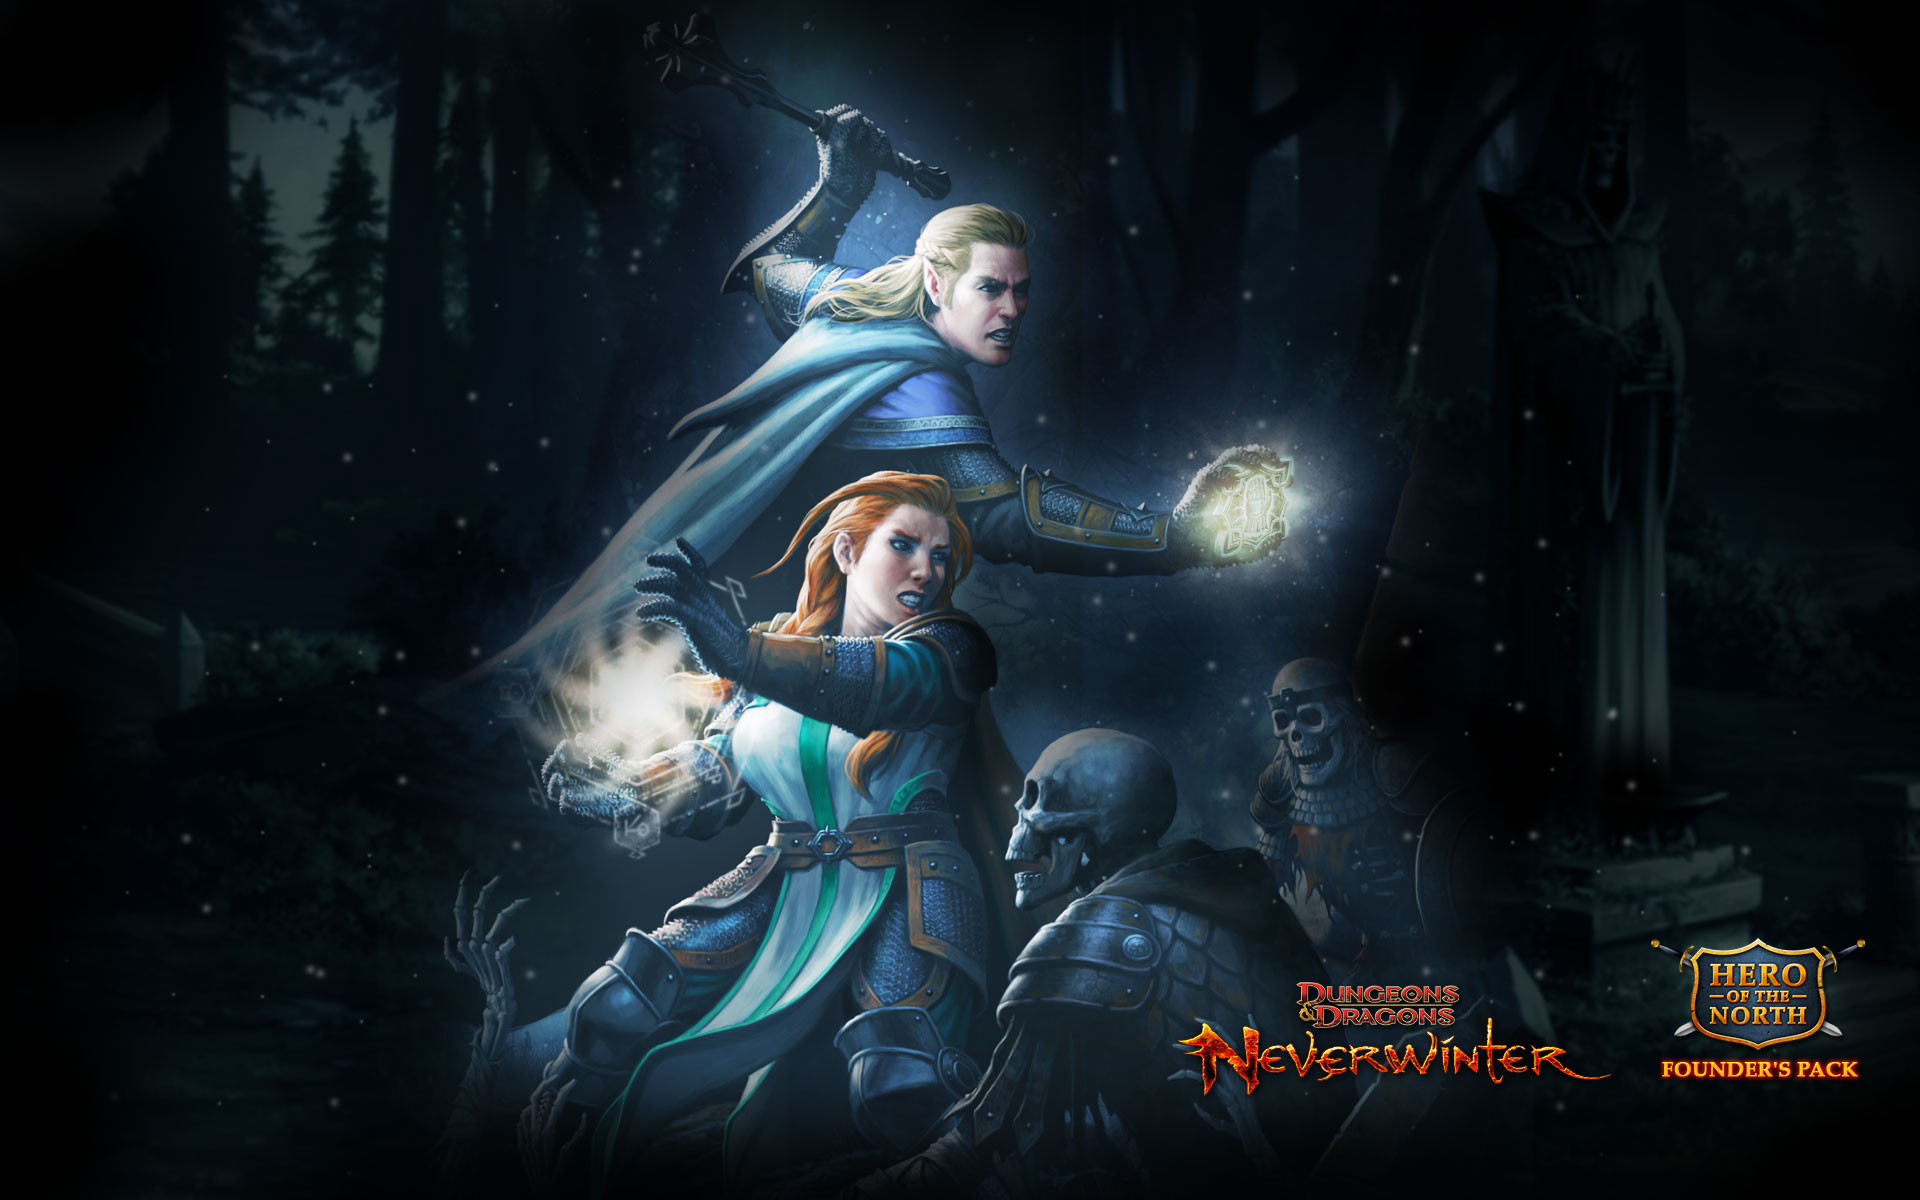 neverwinter mmo download free